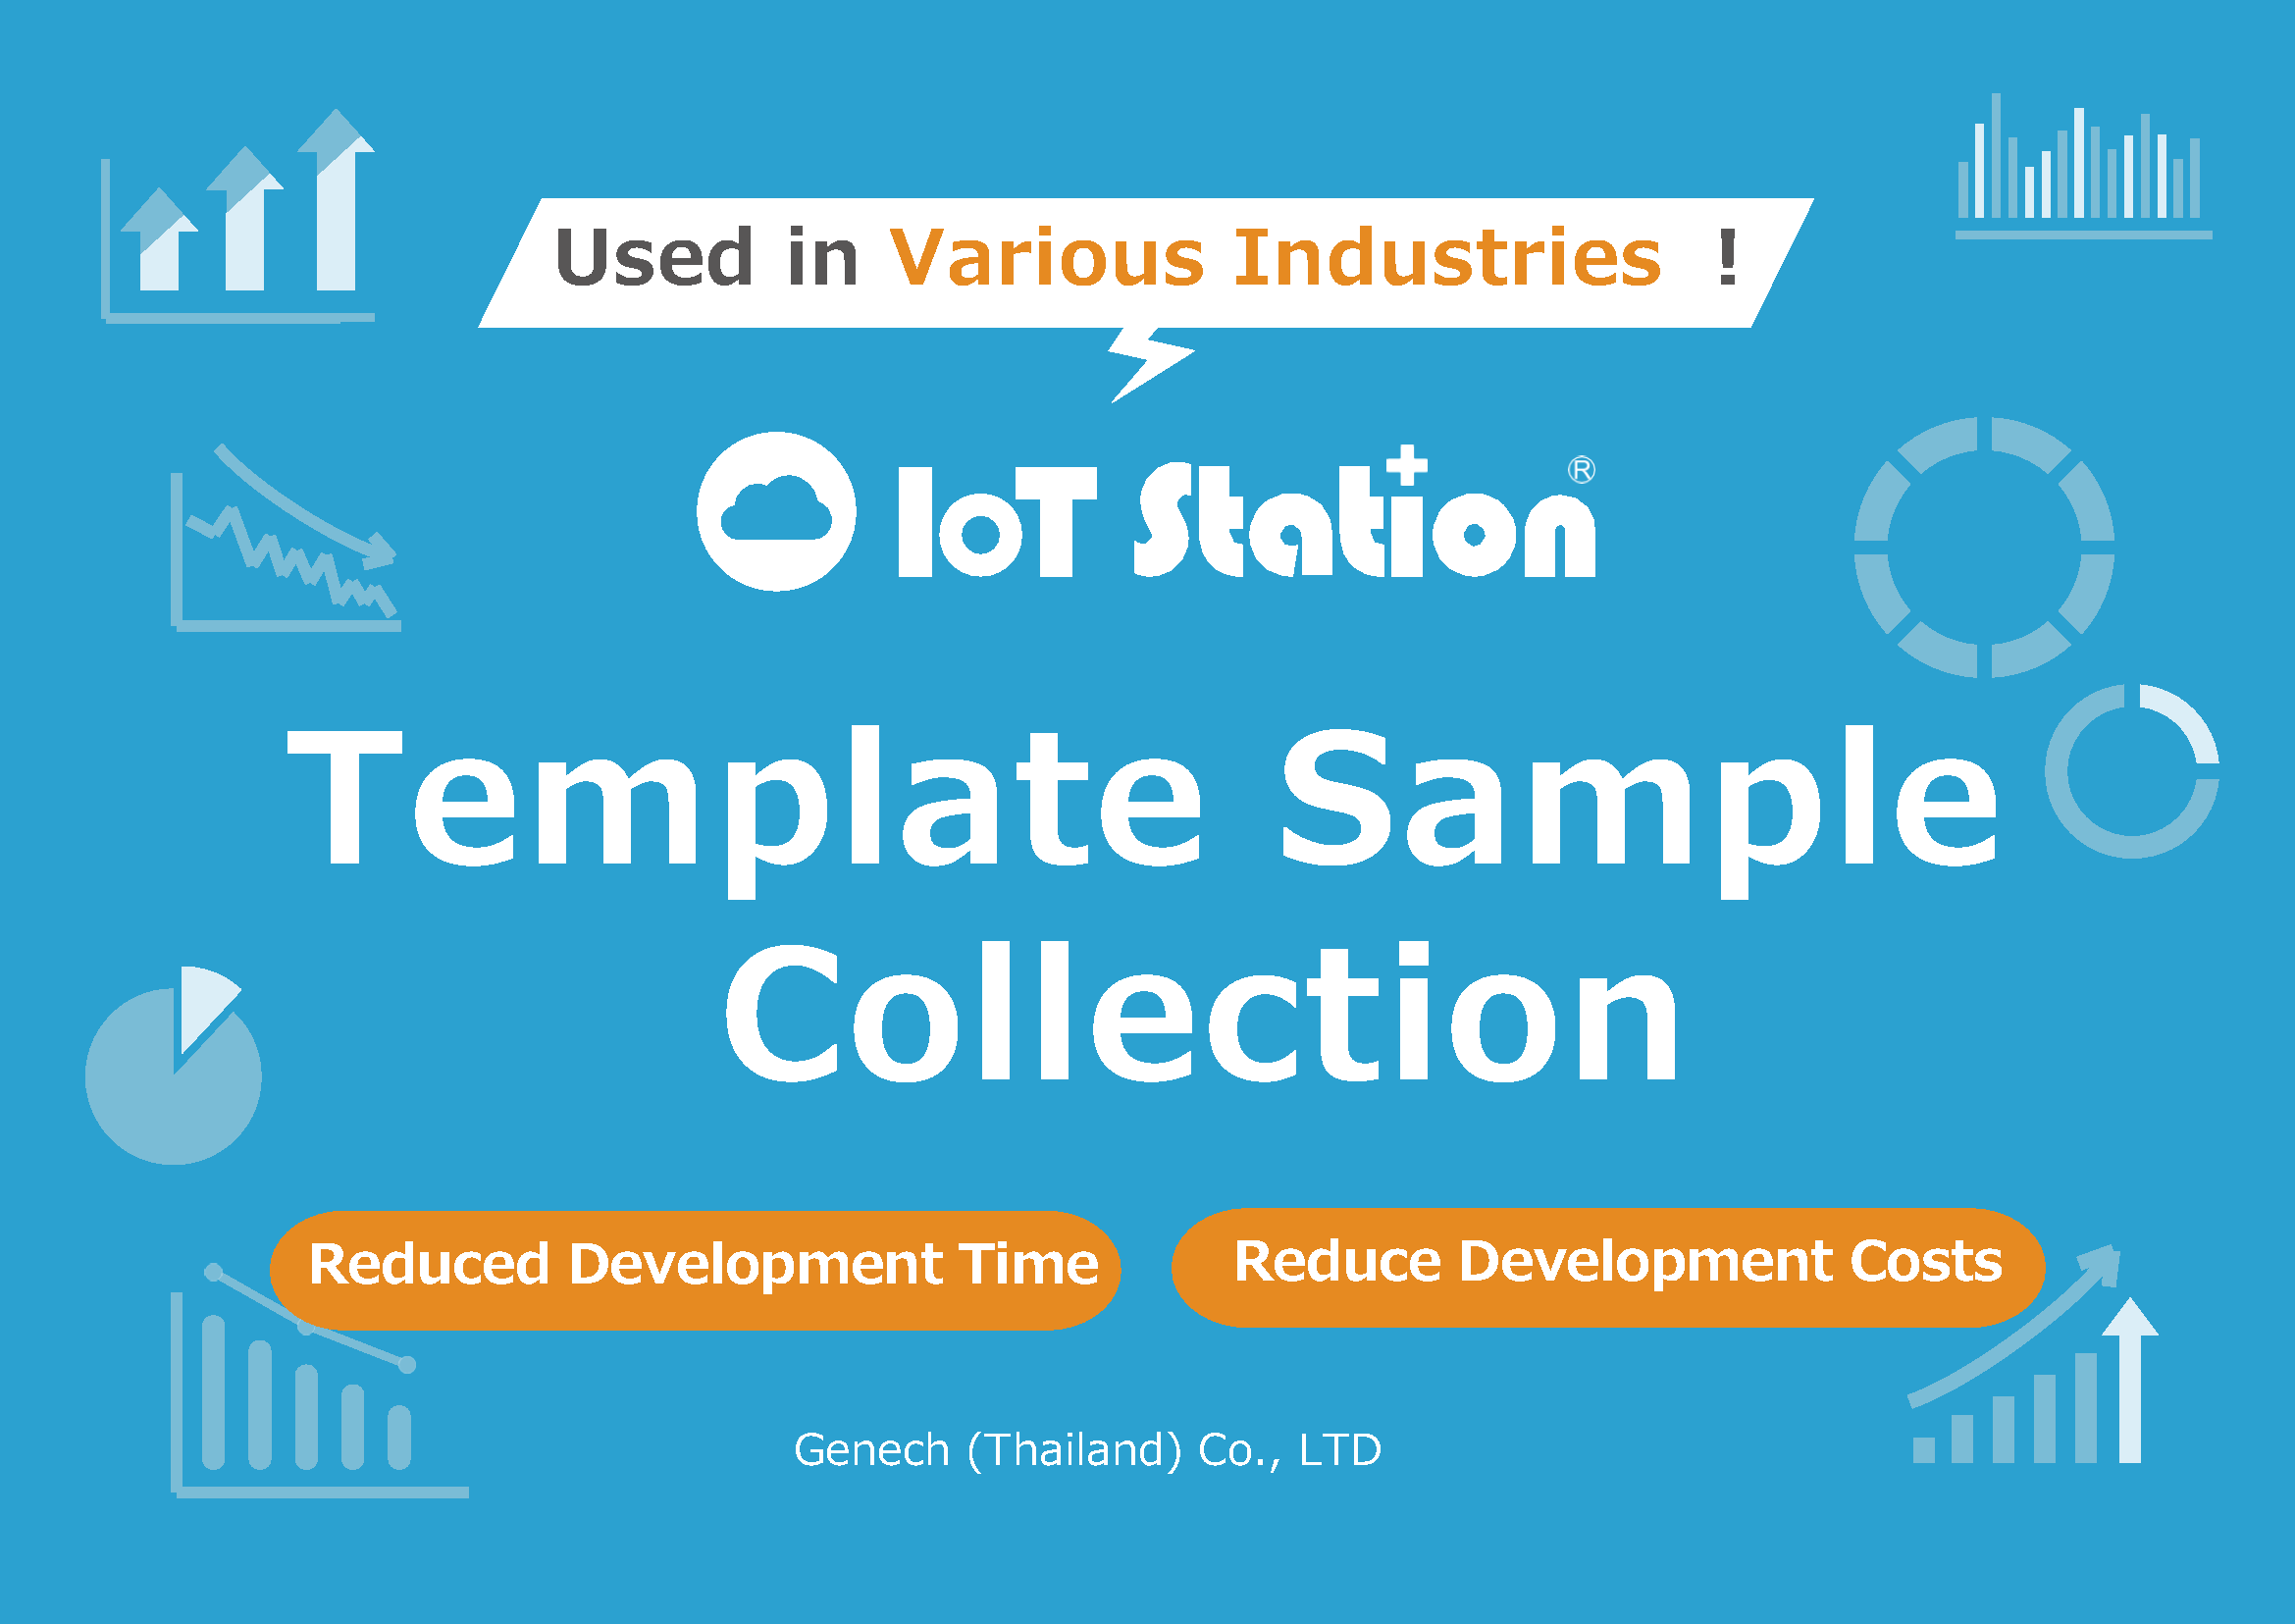 IoT Station Template Sample Collection